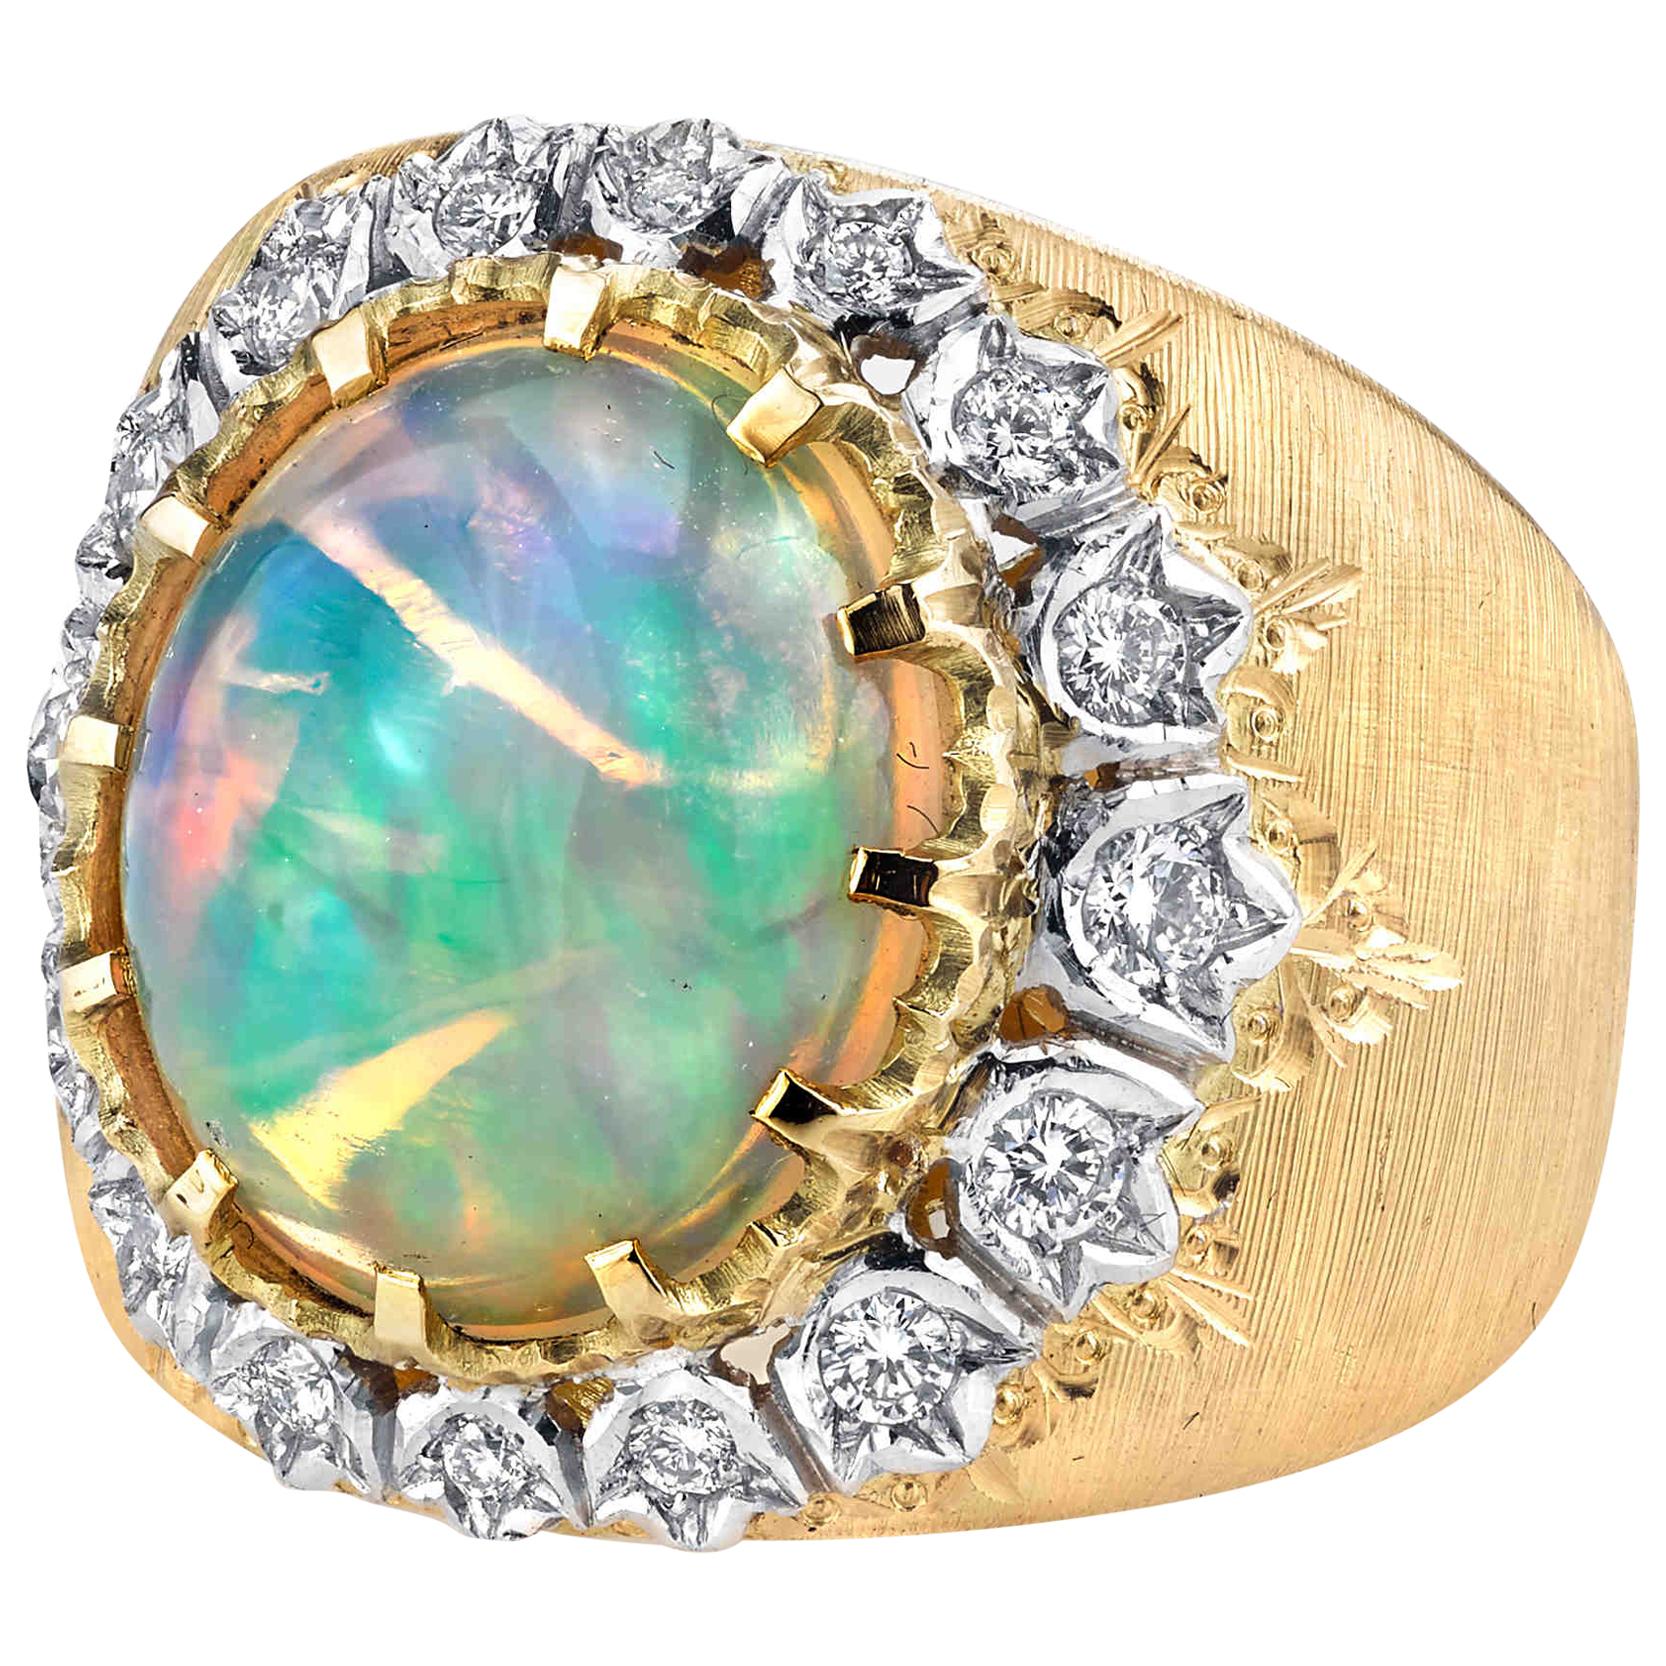 4.79 Carat Opal and Diamond, Yellow and White Gold Florentine Band Dome Ring